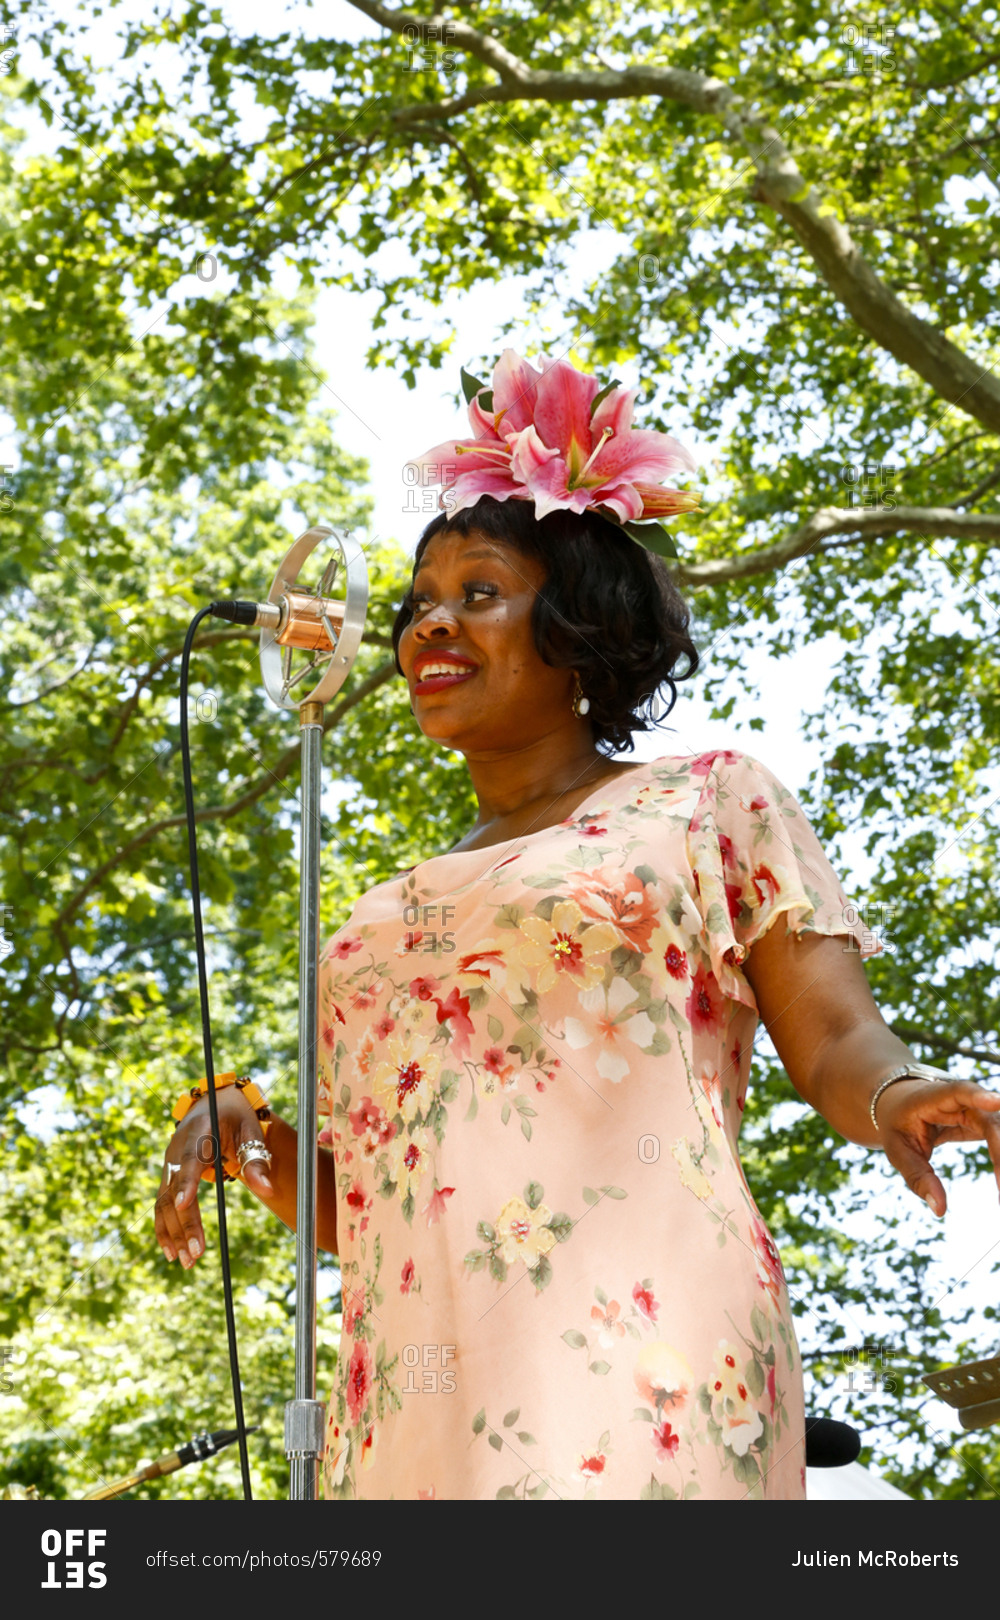 New York City, United States - June 10, 2017: 1920's Jazz
Age Lawn Party at Governors Island, Woman in vintage clothing
singing at a 1920s-themed party stock photo - OFFSET